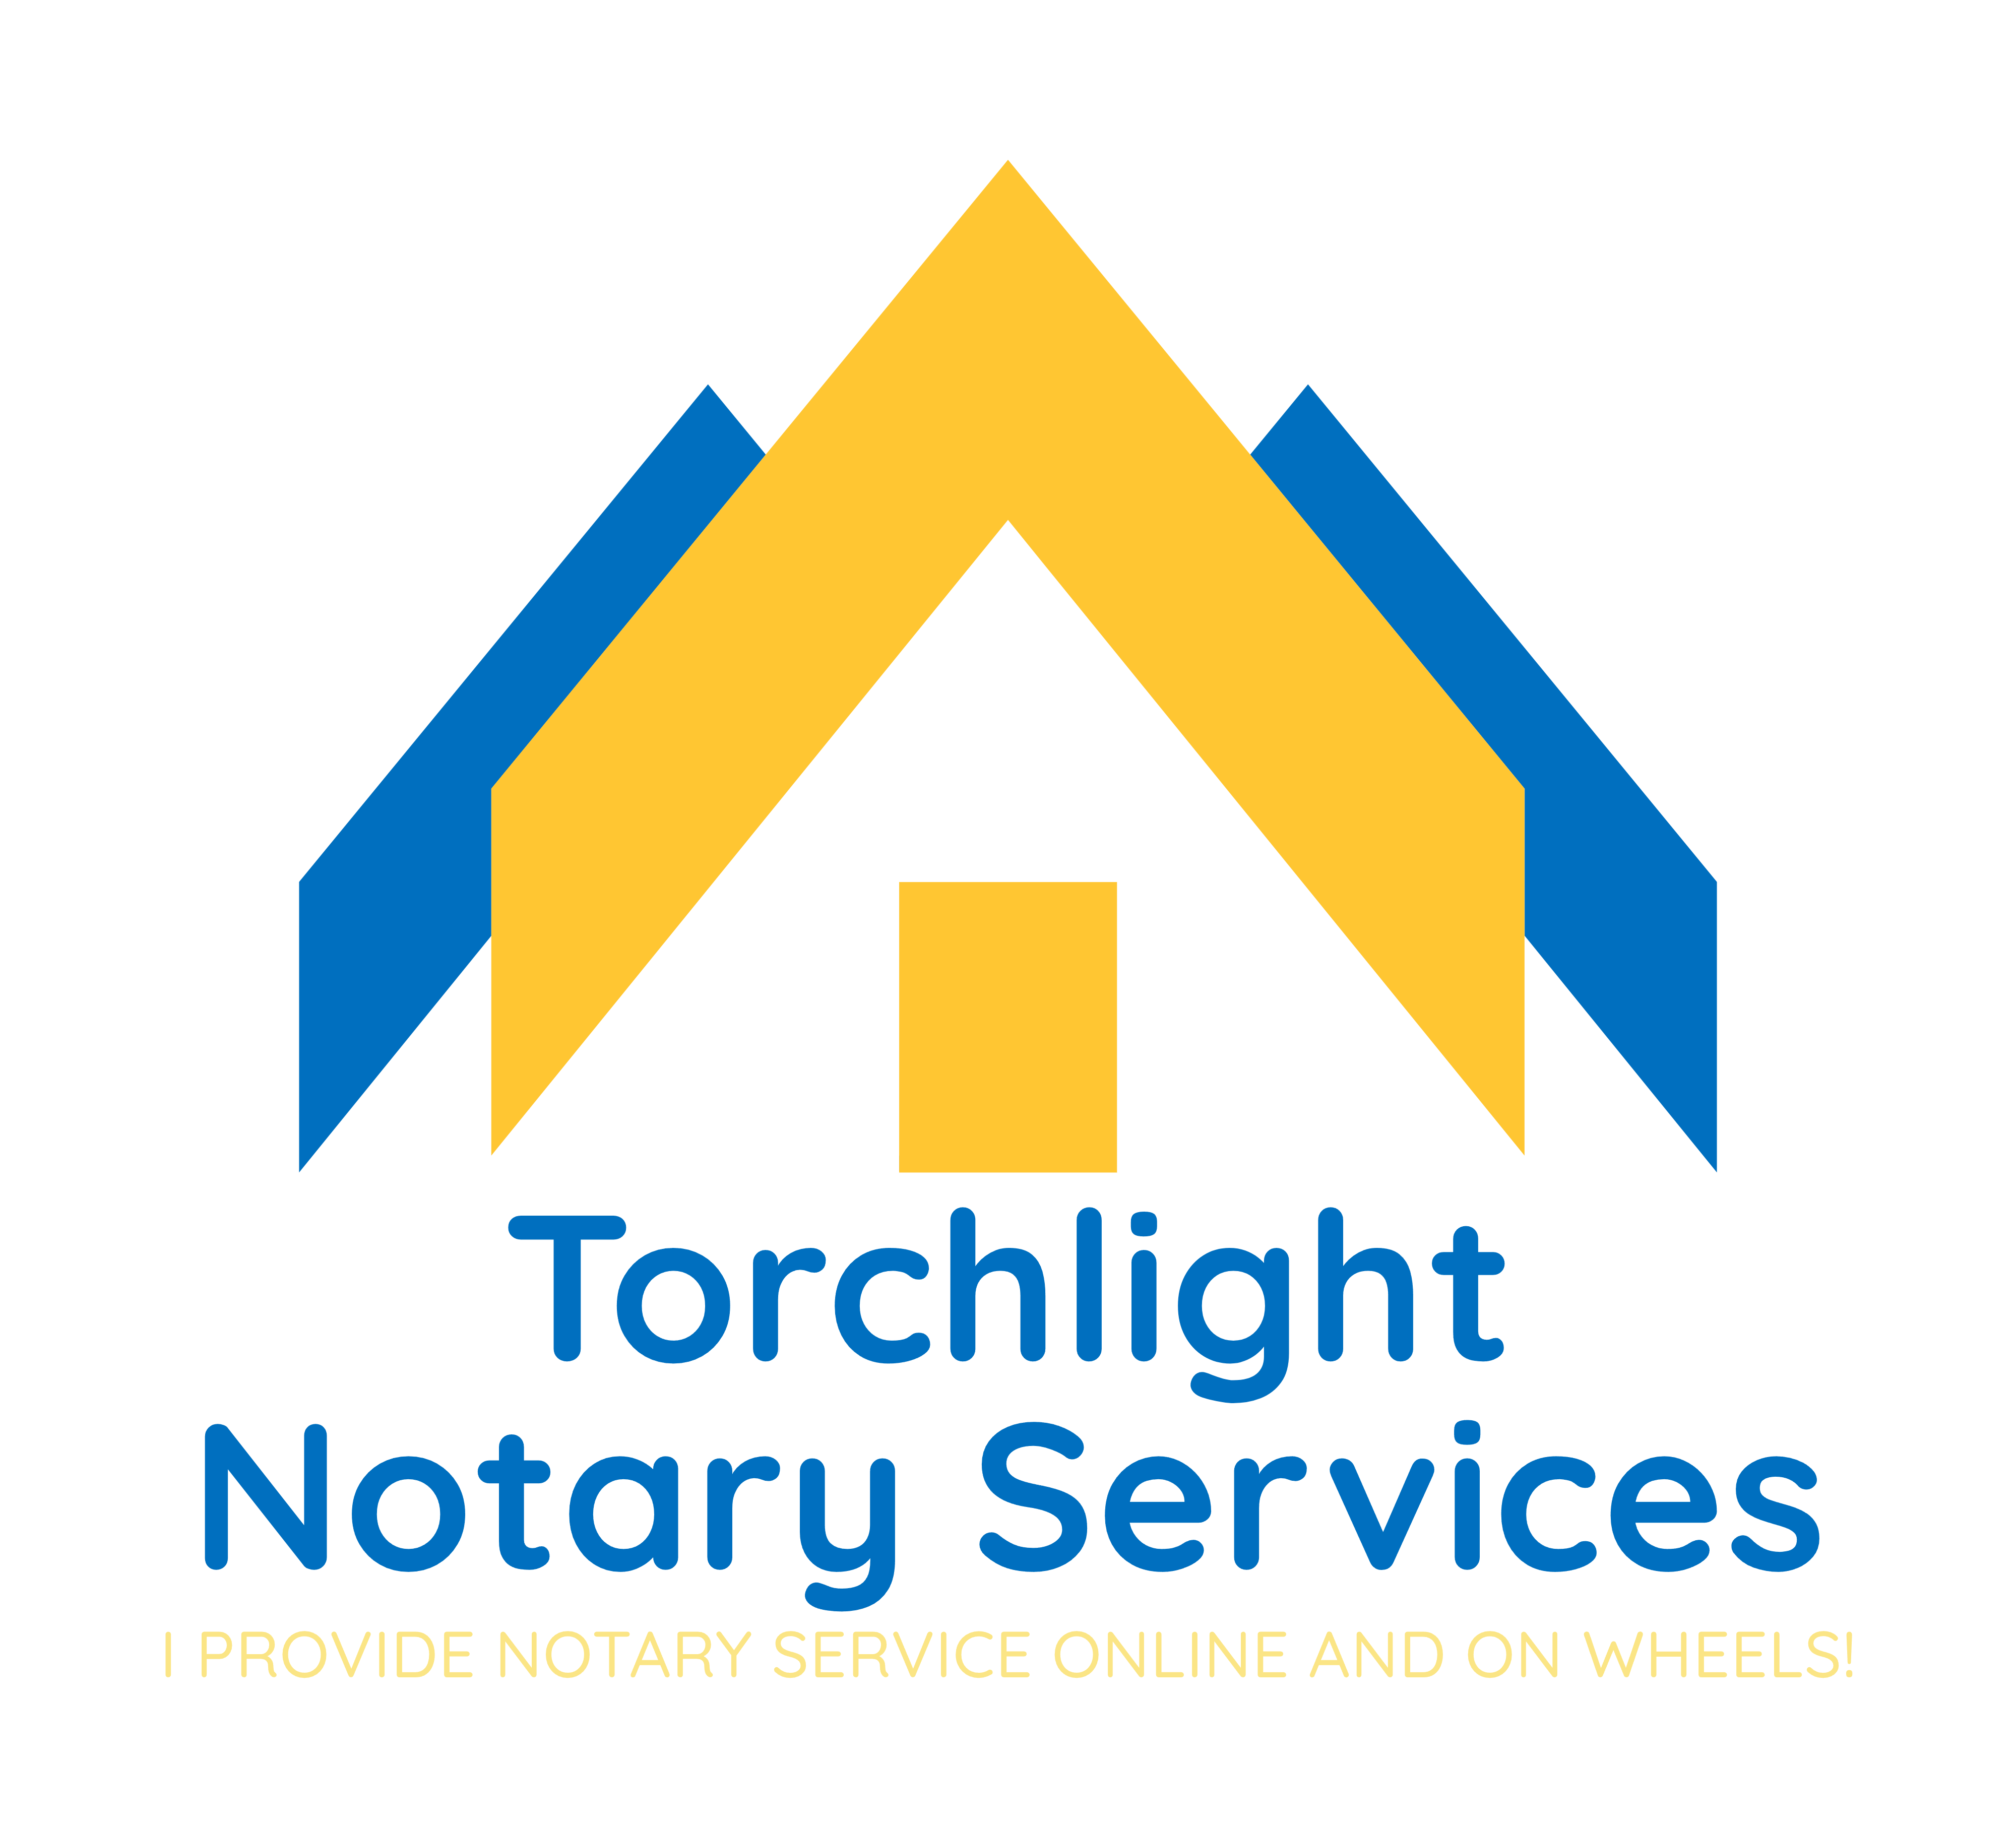 TORCHLIGHT NOTARY SERVICES